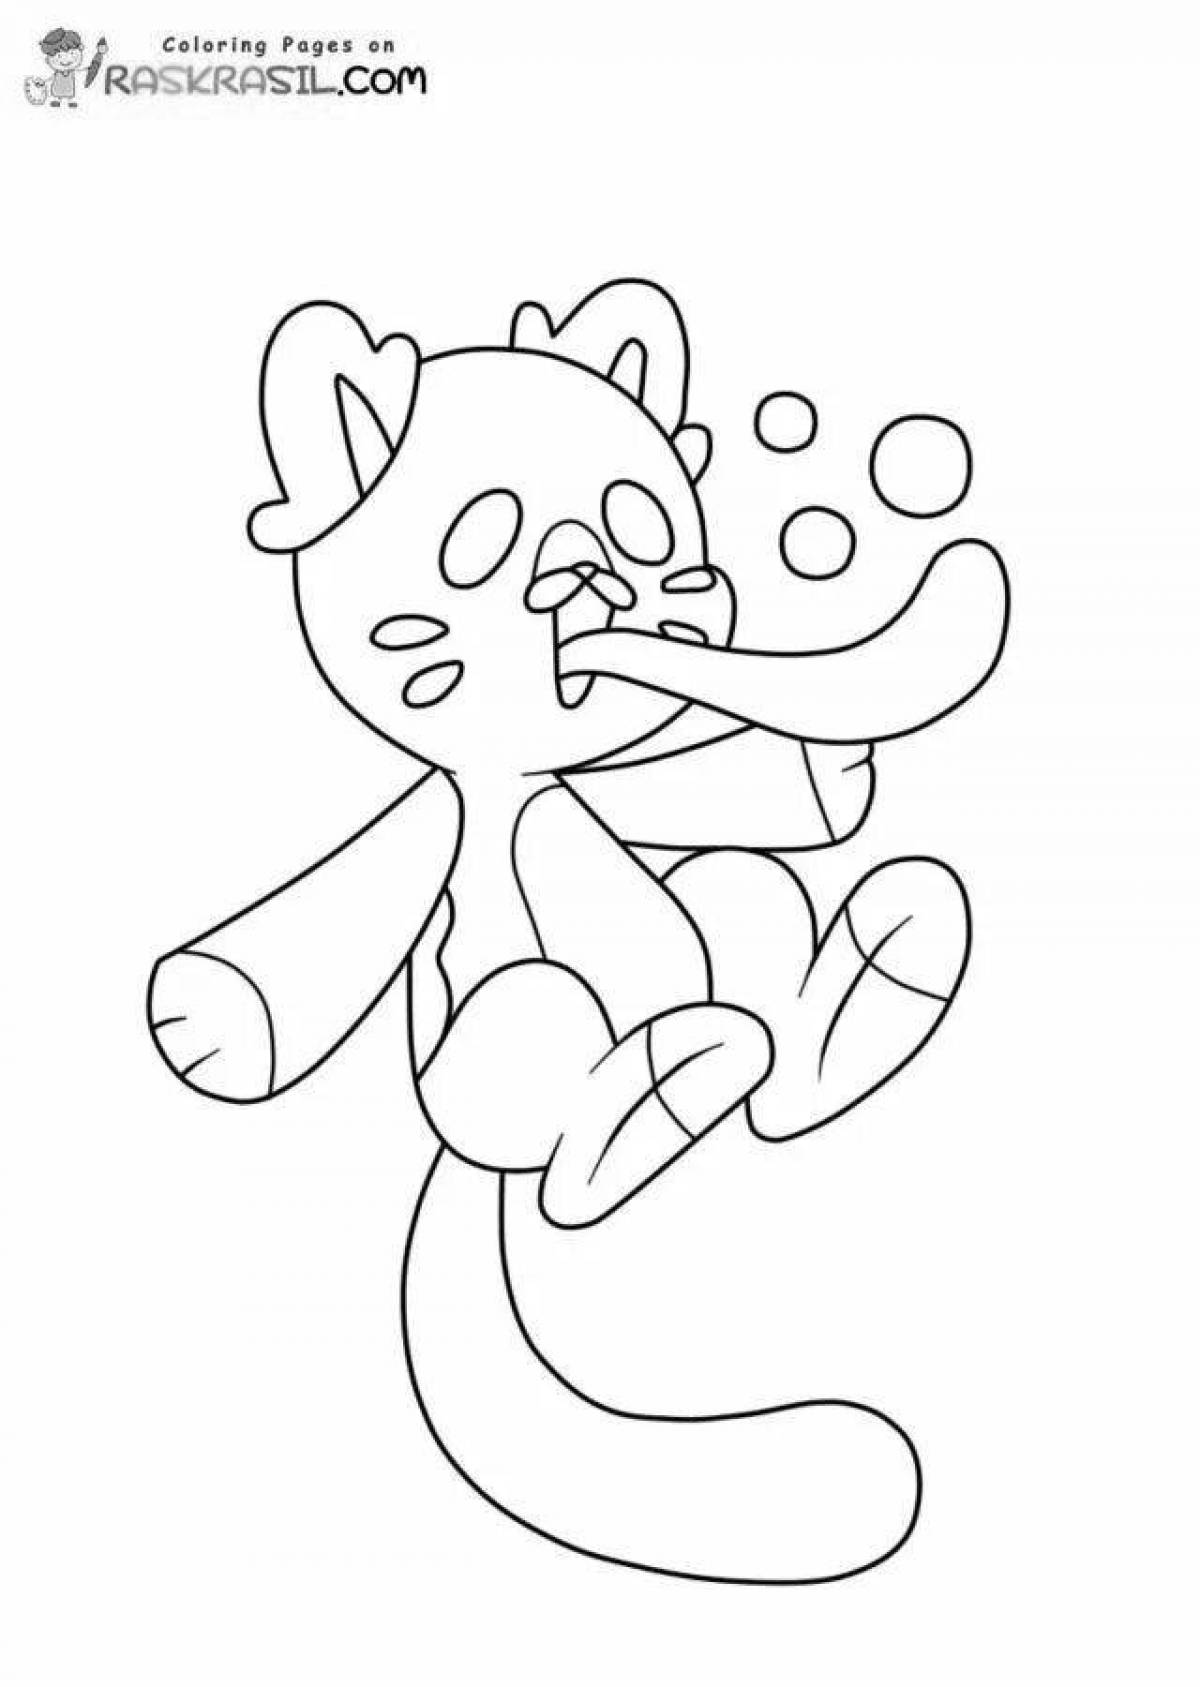 Candy cat funny coloring book